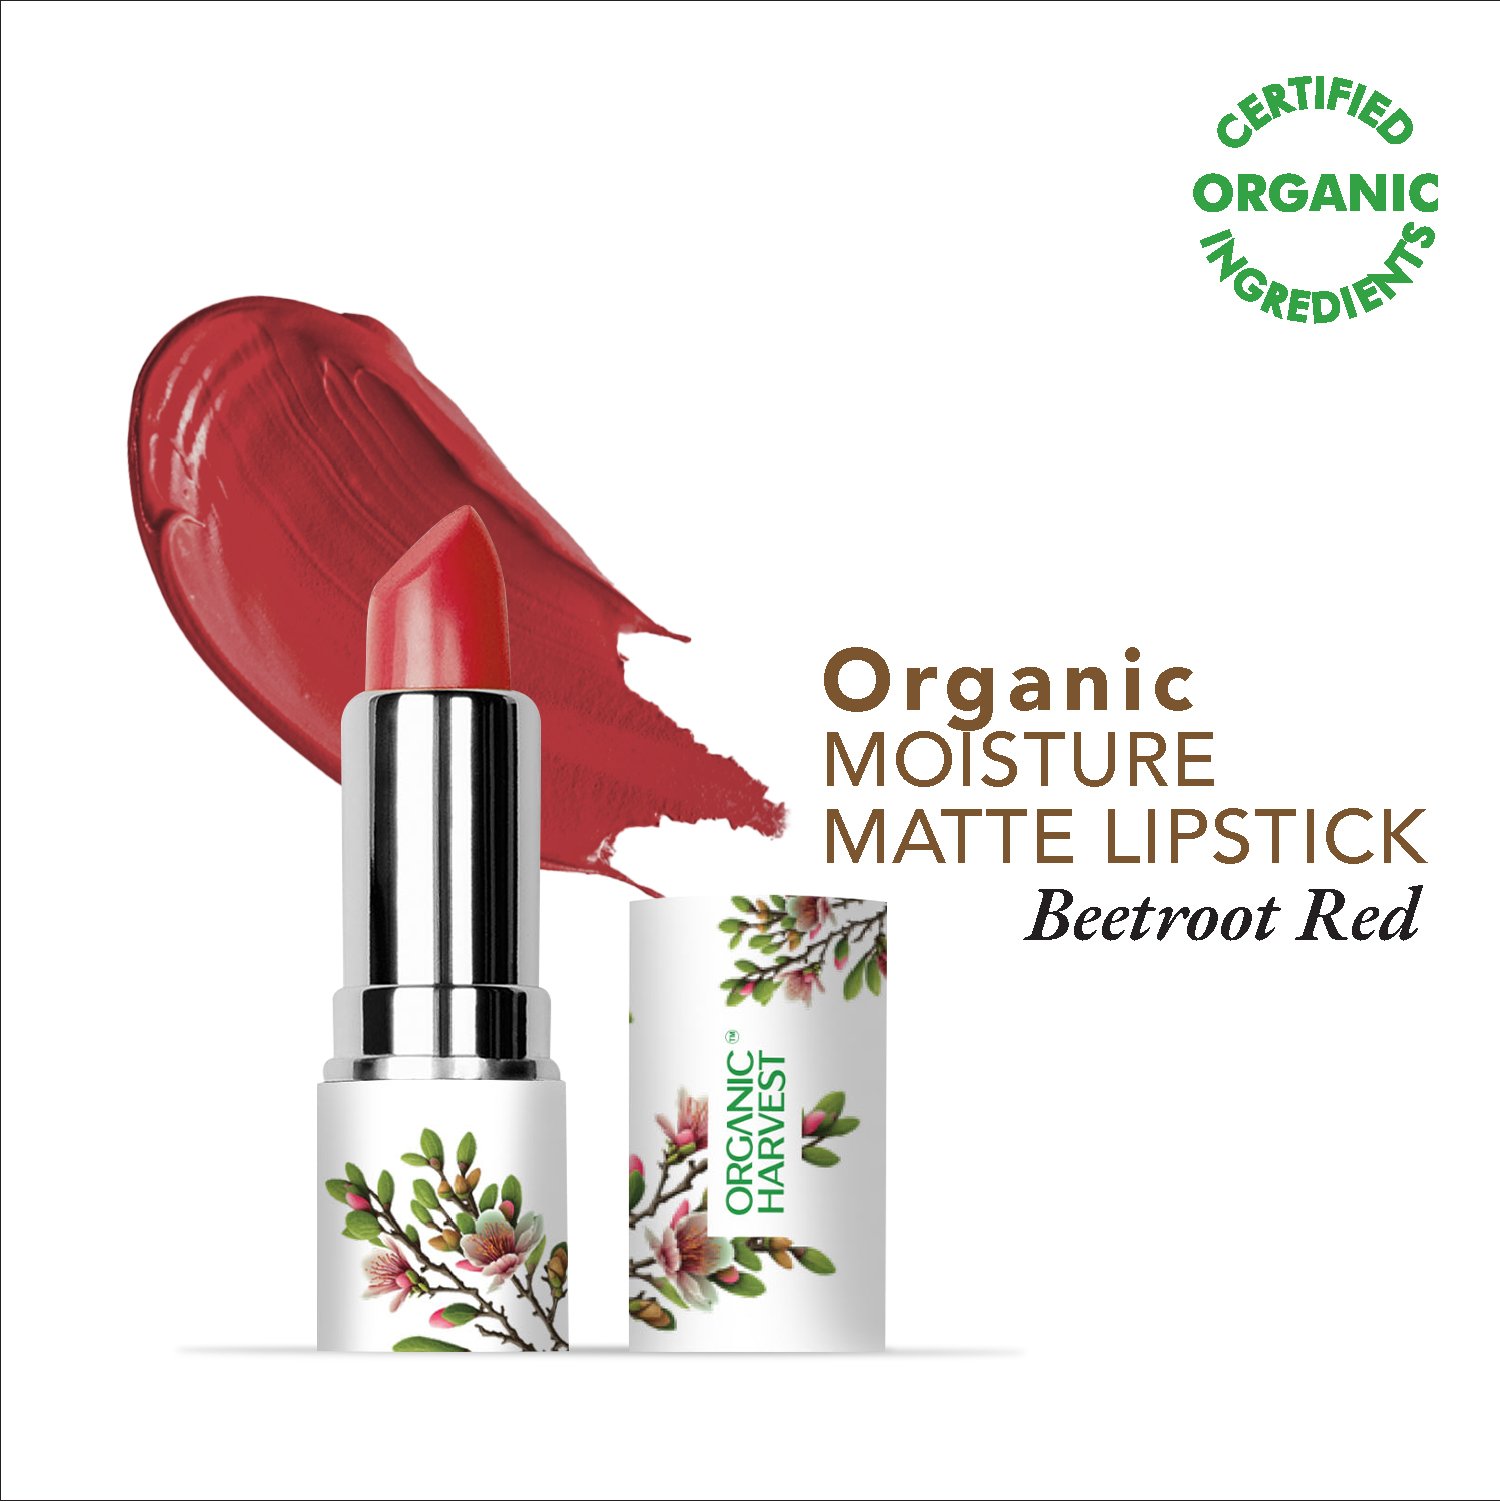 Moisture Matte Lipstick in Beetroot Red by Organic Harvest